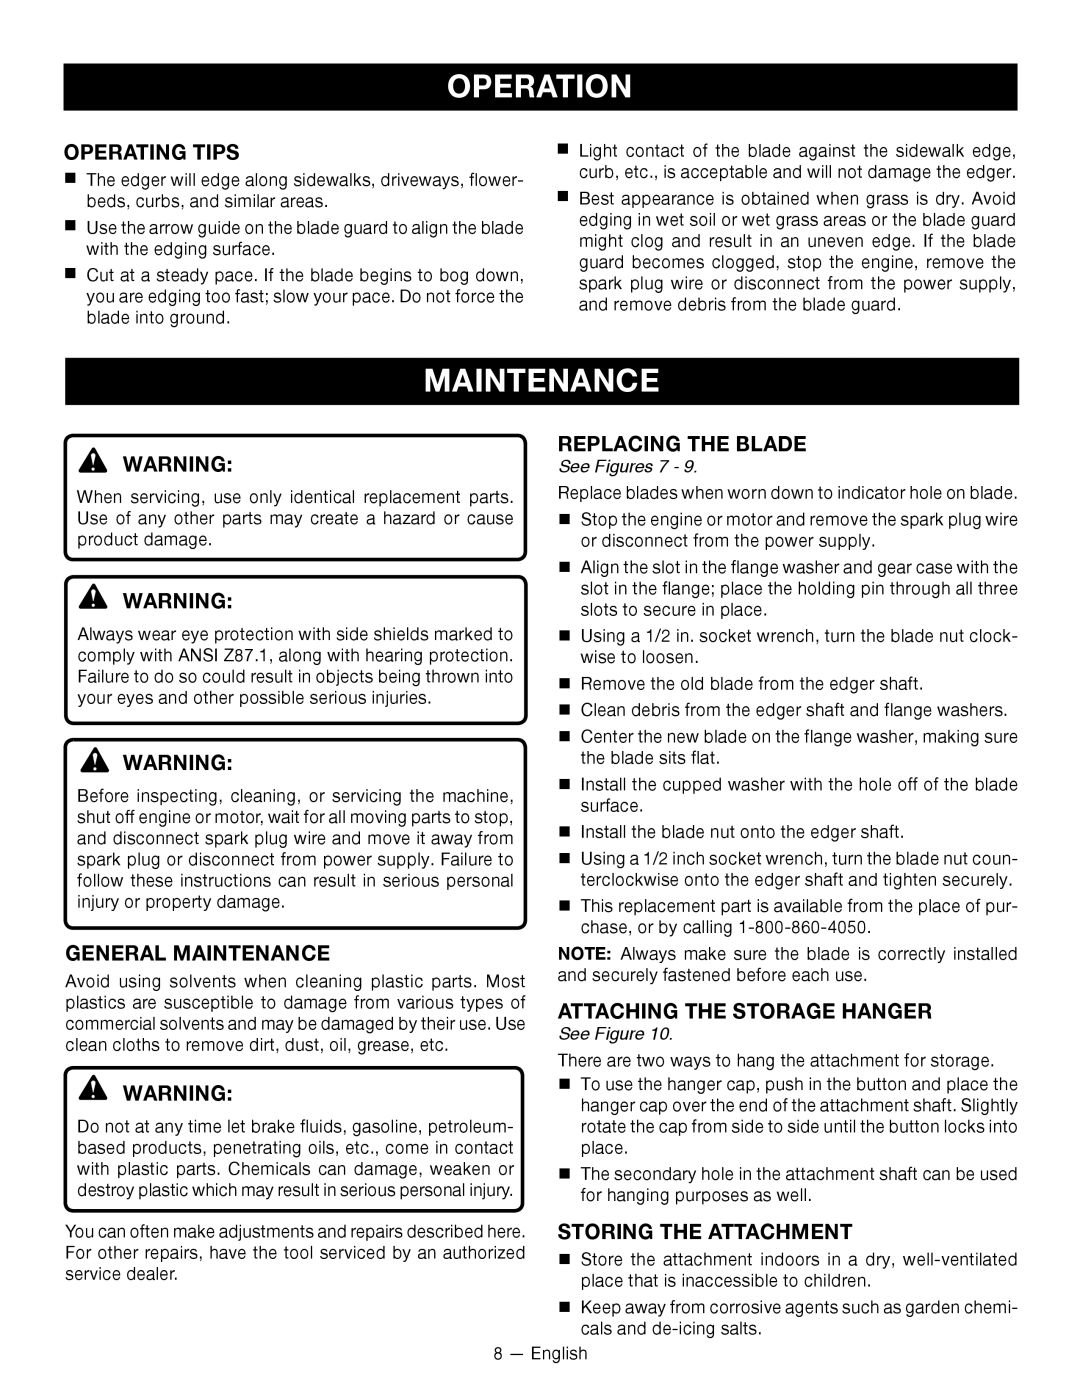 Ryobi RY15518 Operating Tips, General Maintenance, Replacing The Blade, Attaching The Storage Hanger, See Figures 